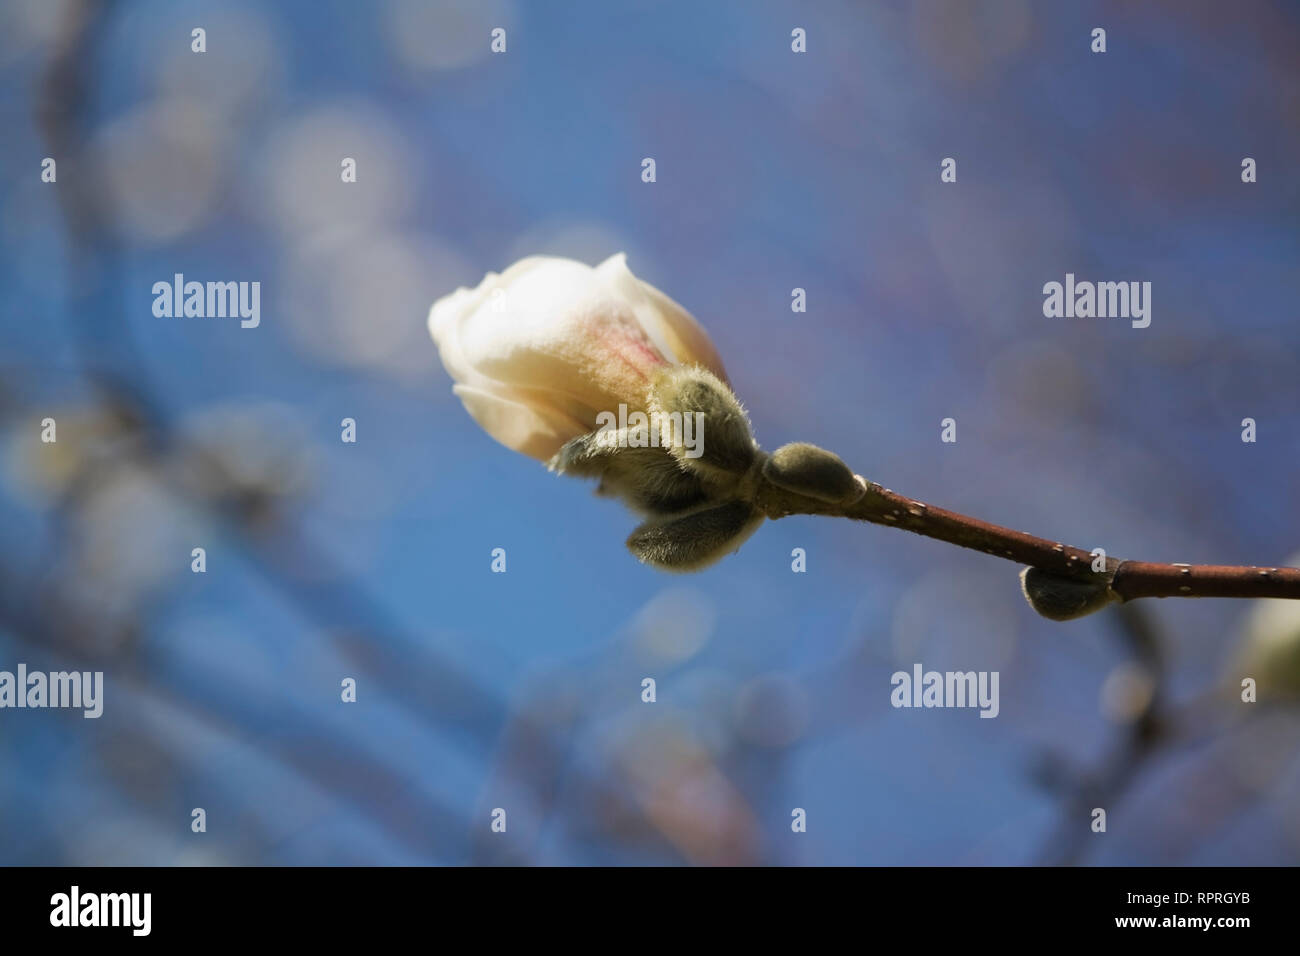 Close-up of a Magnolia tree flower blossom in spring Stock Photo